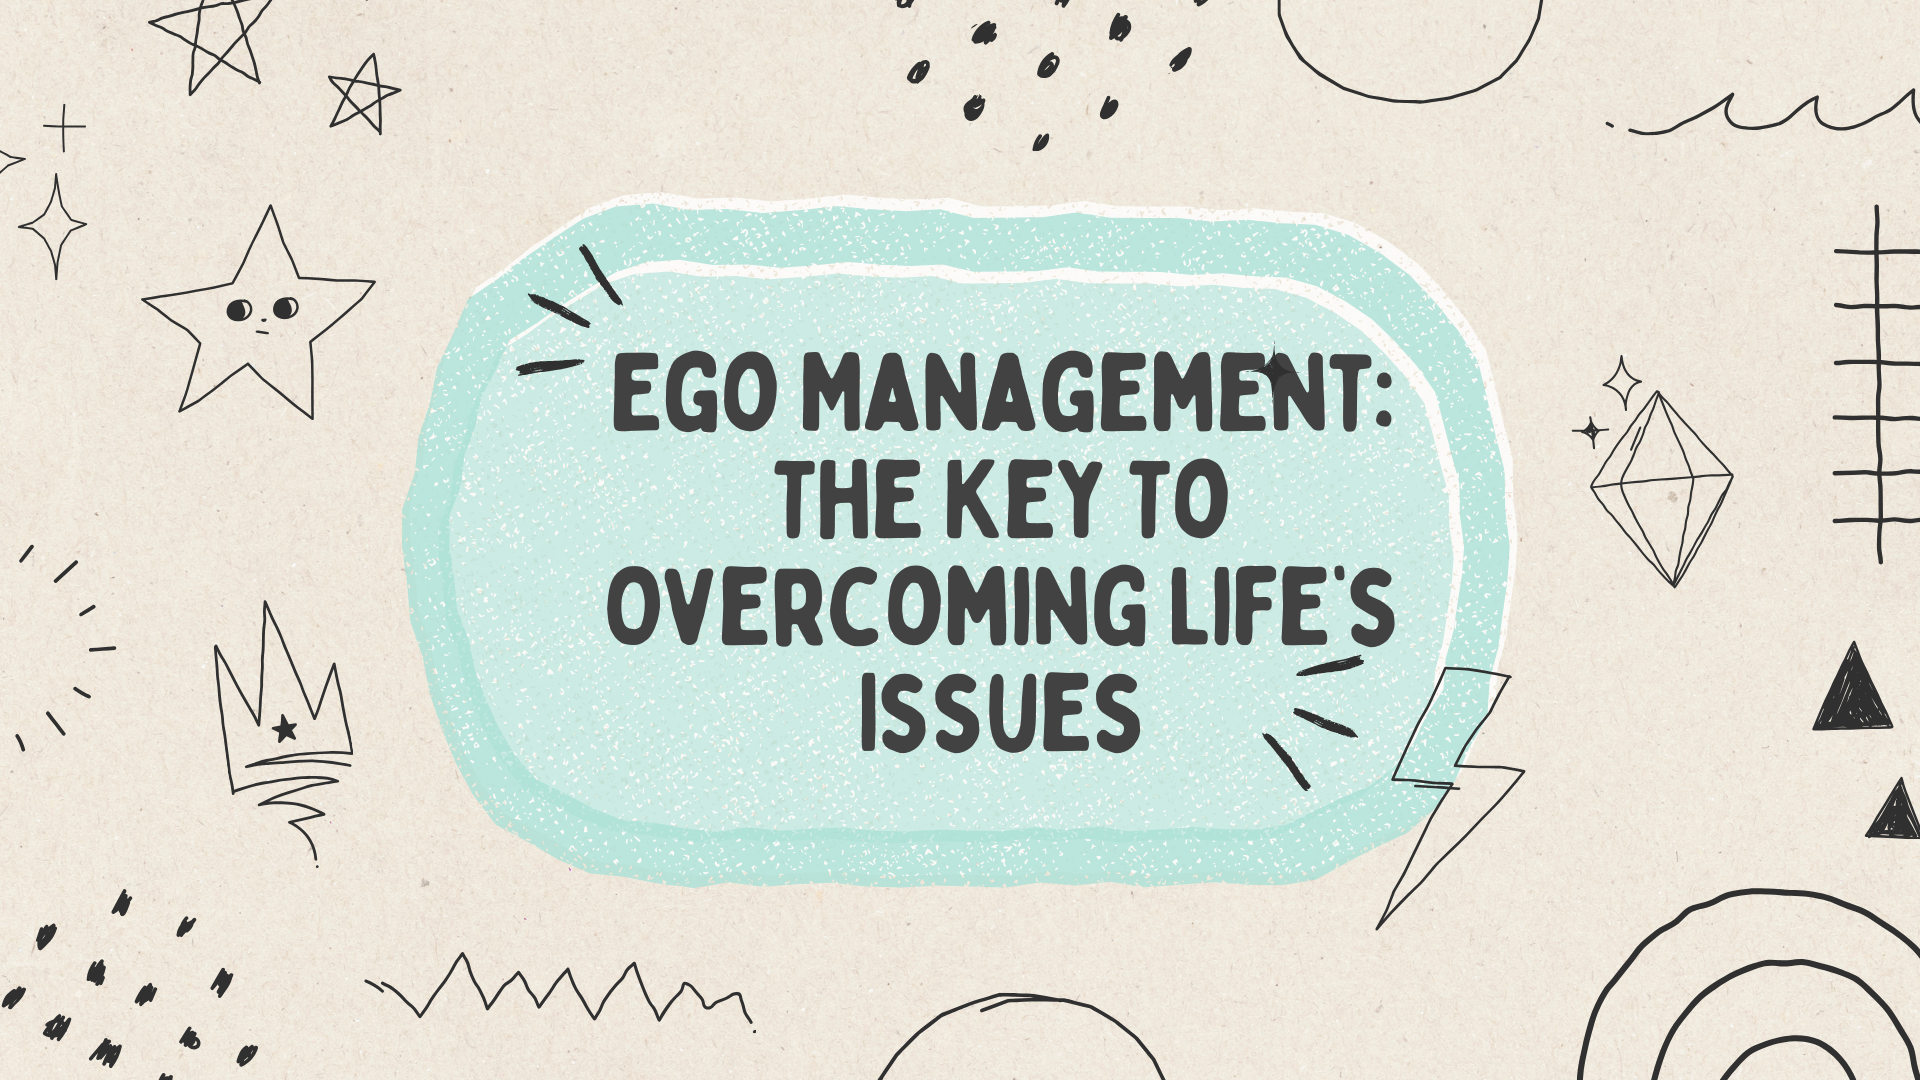 Ego Management: The Key To Overcoming Life’s Issues